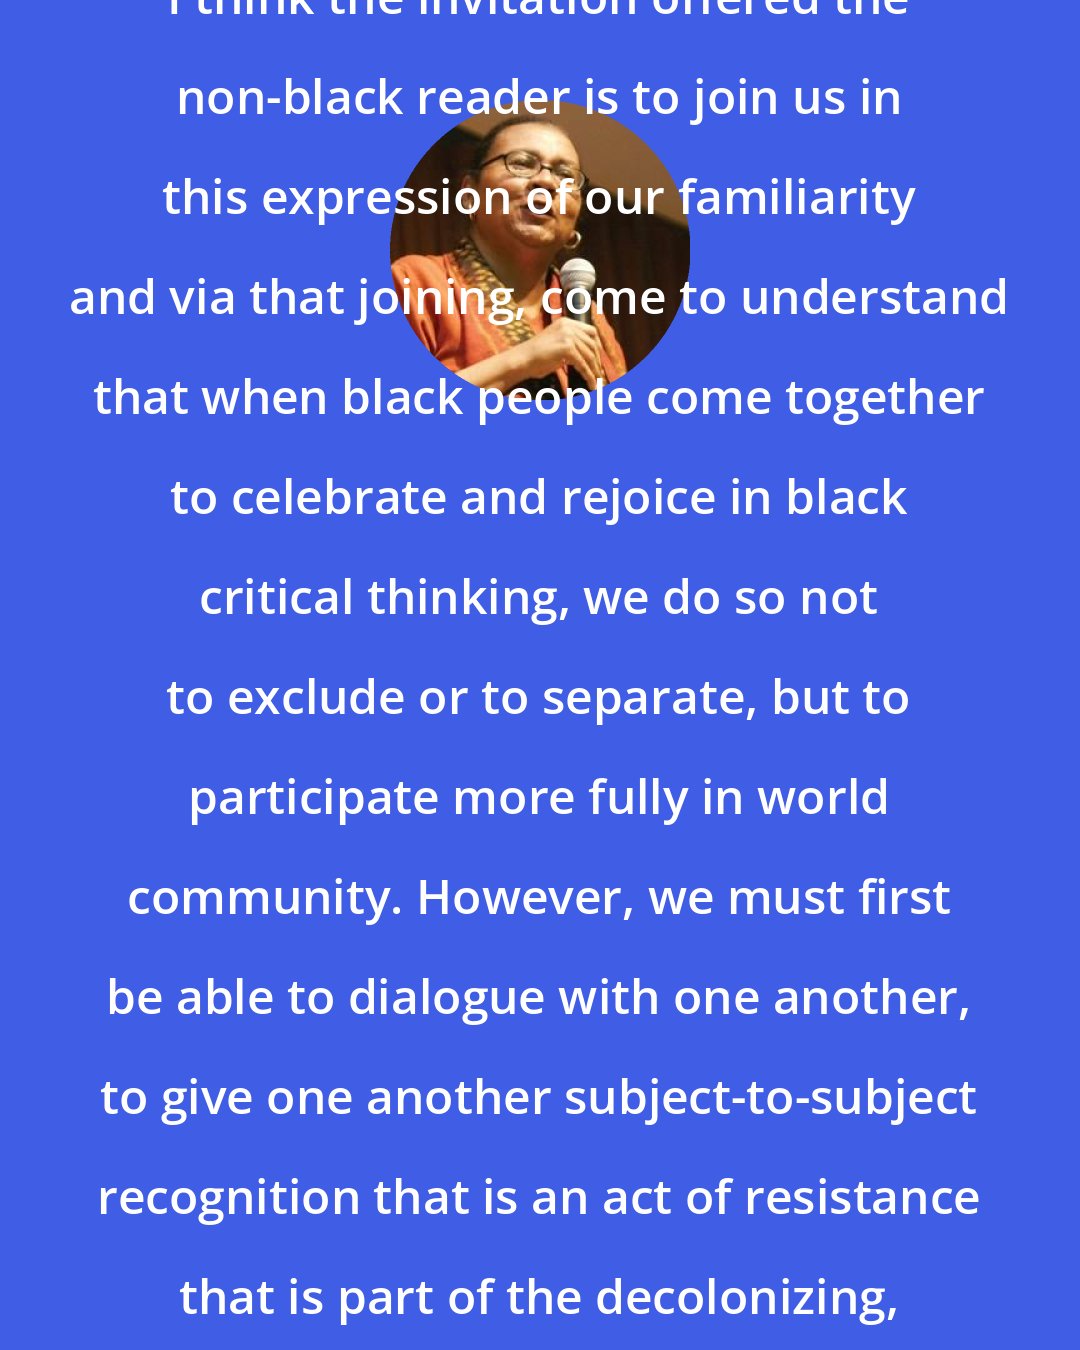 Bell Hooks: I think the invitation offered the non-black reader is to join us in this expression of our familiarity and via that joining, come to understand that when black people come together to celebrate and rejoice in black critical thinking, we do so not to exclude or to separate, but to participate more fully in world community. However, we must first be able to dialogue with one another, to give one another subject-to-subject recognition that is an act of resistance that is part of the decolonizing, anti-racist process.